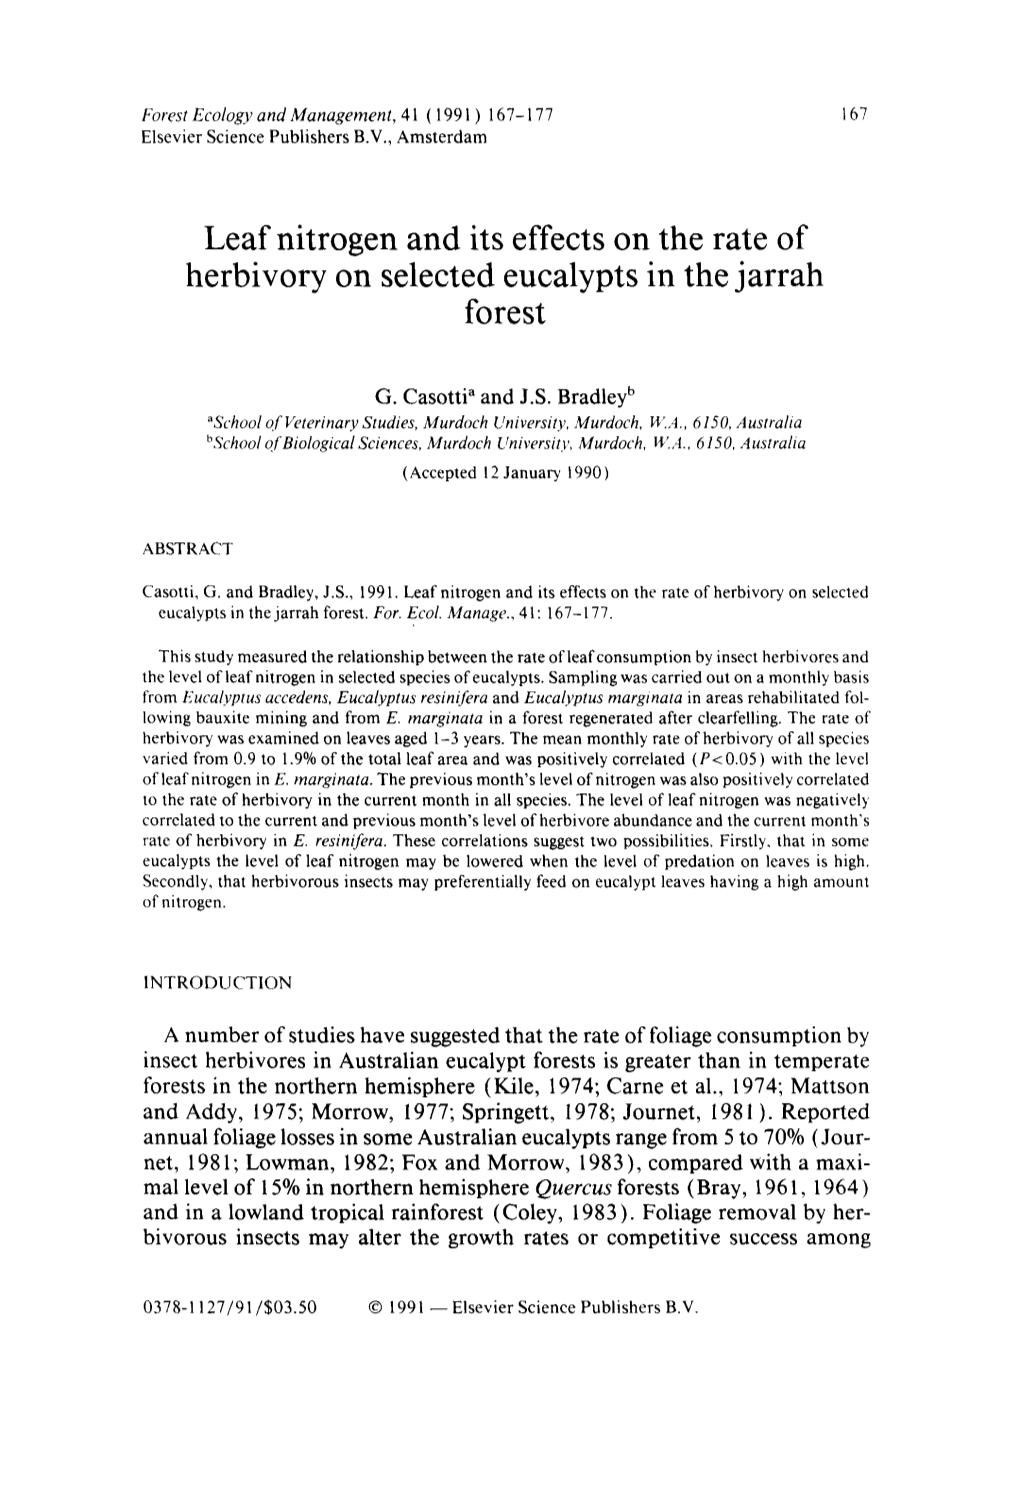 Leaf Nitrogen and Its Effects on the Rate of Herbivory on Selected Eucalypts in the Jarrah Forest